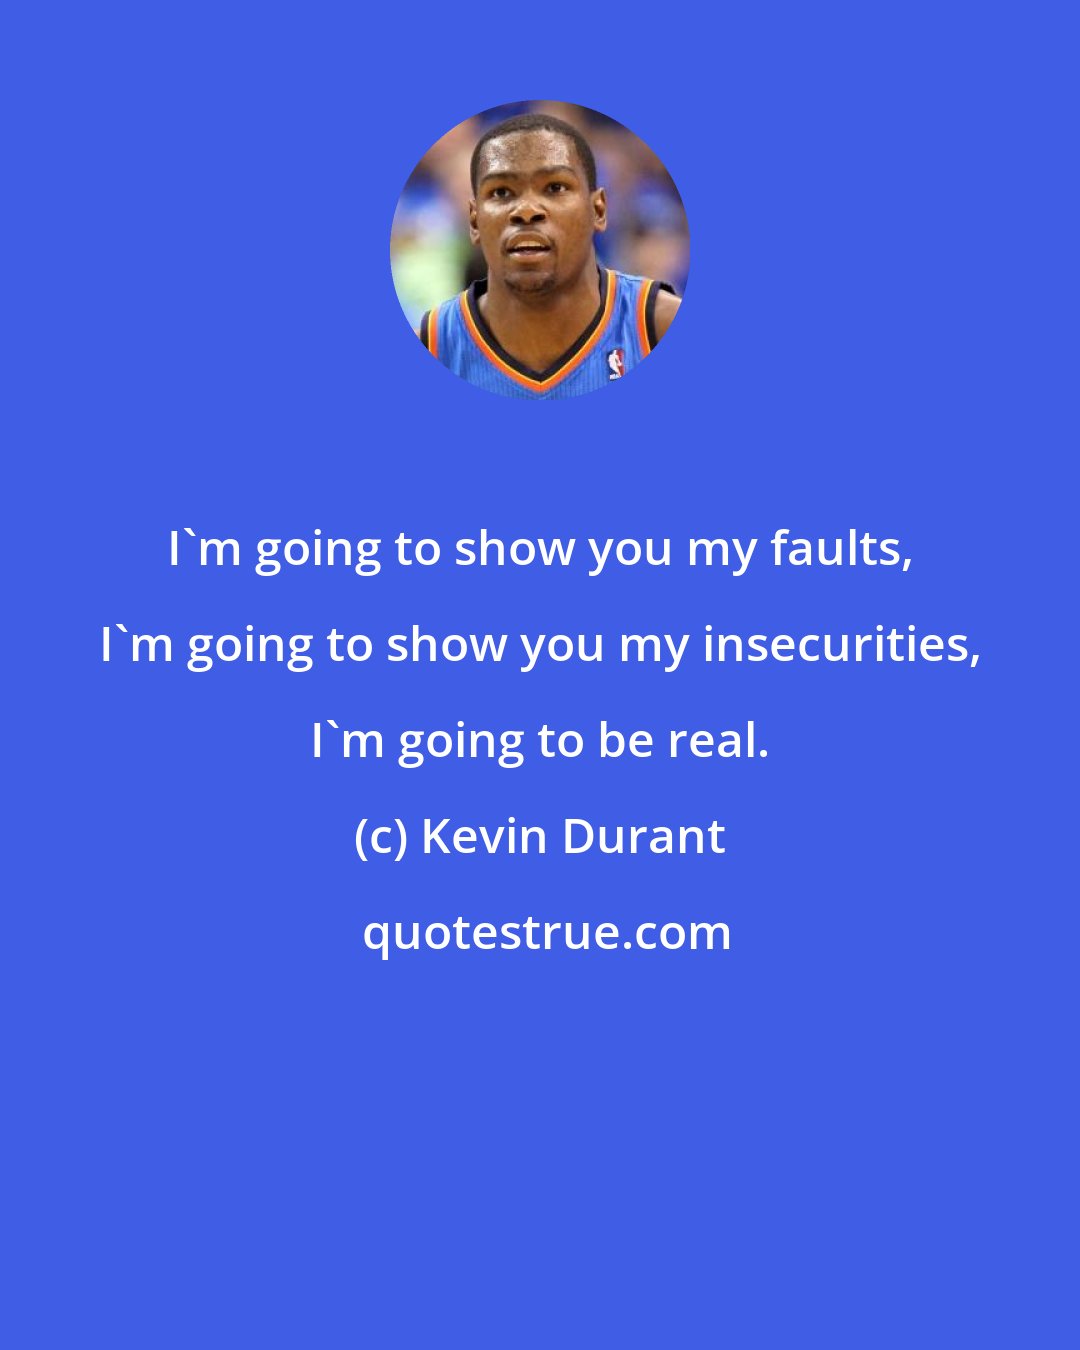 Kevin Durant: I'm going to show you my faults, I'm going to show you my insecurities, I'm going to be real.